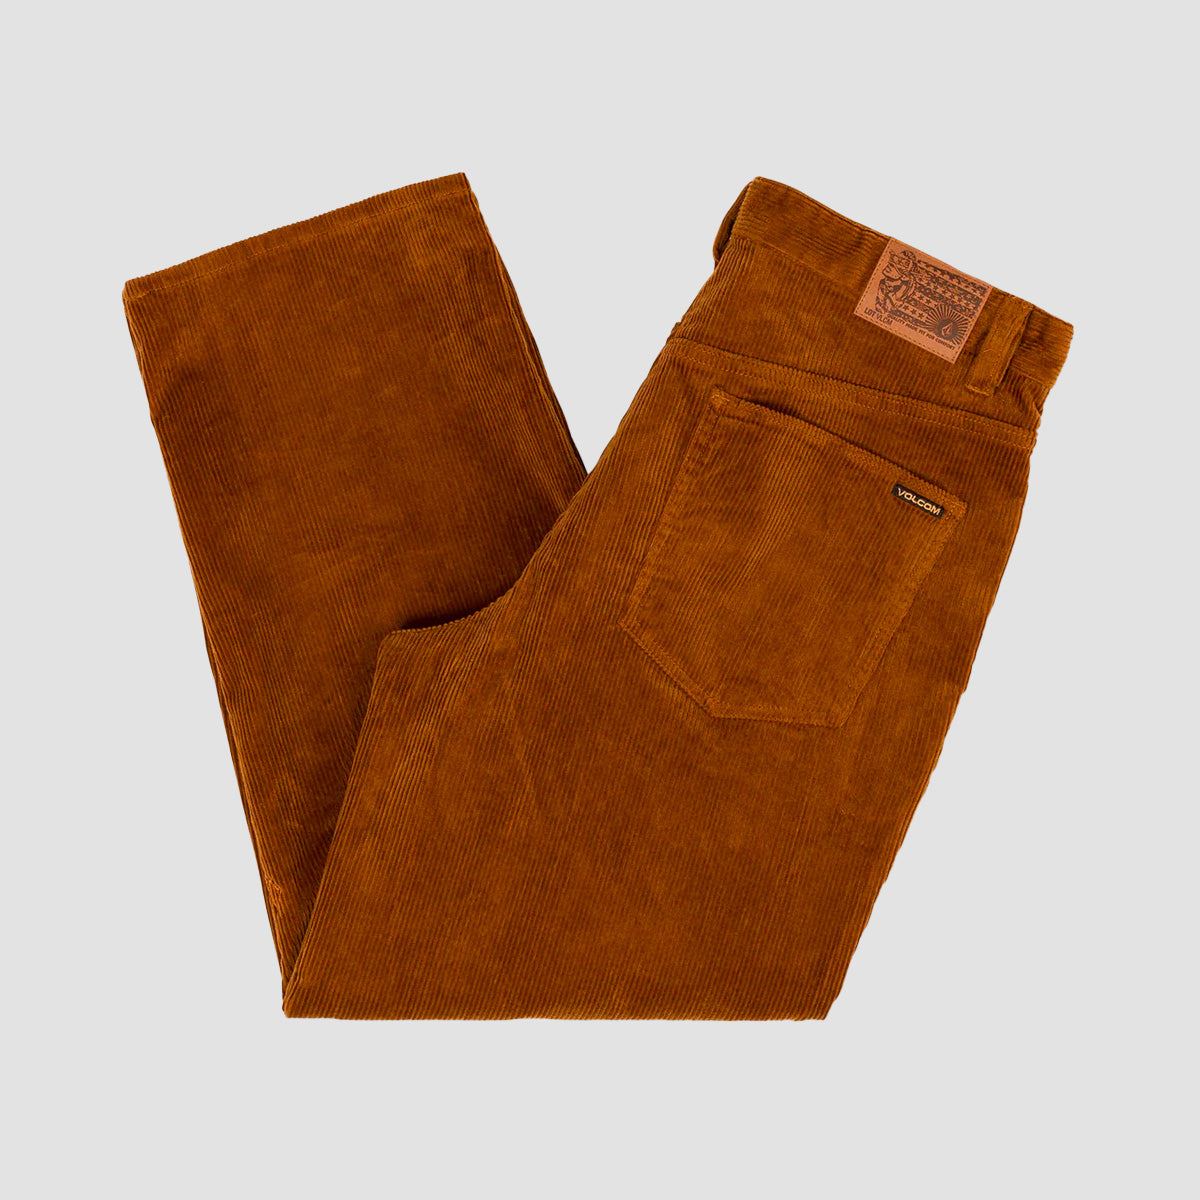 Volcom Lurking About Mind Invasion Corduroy Pants Rubber